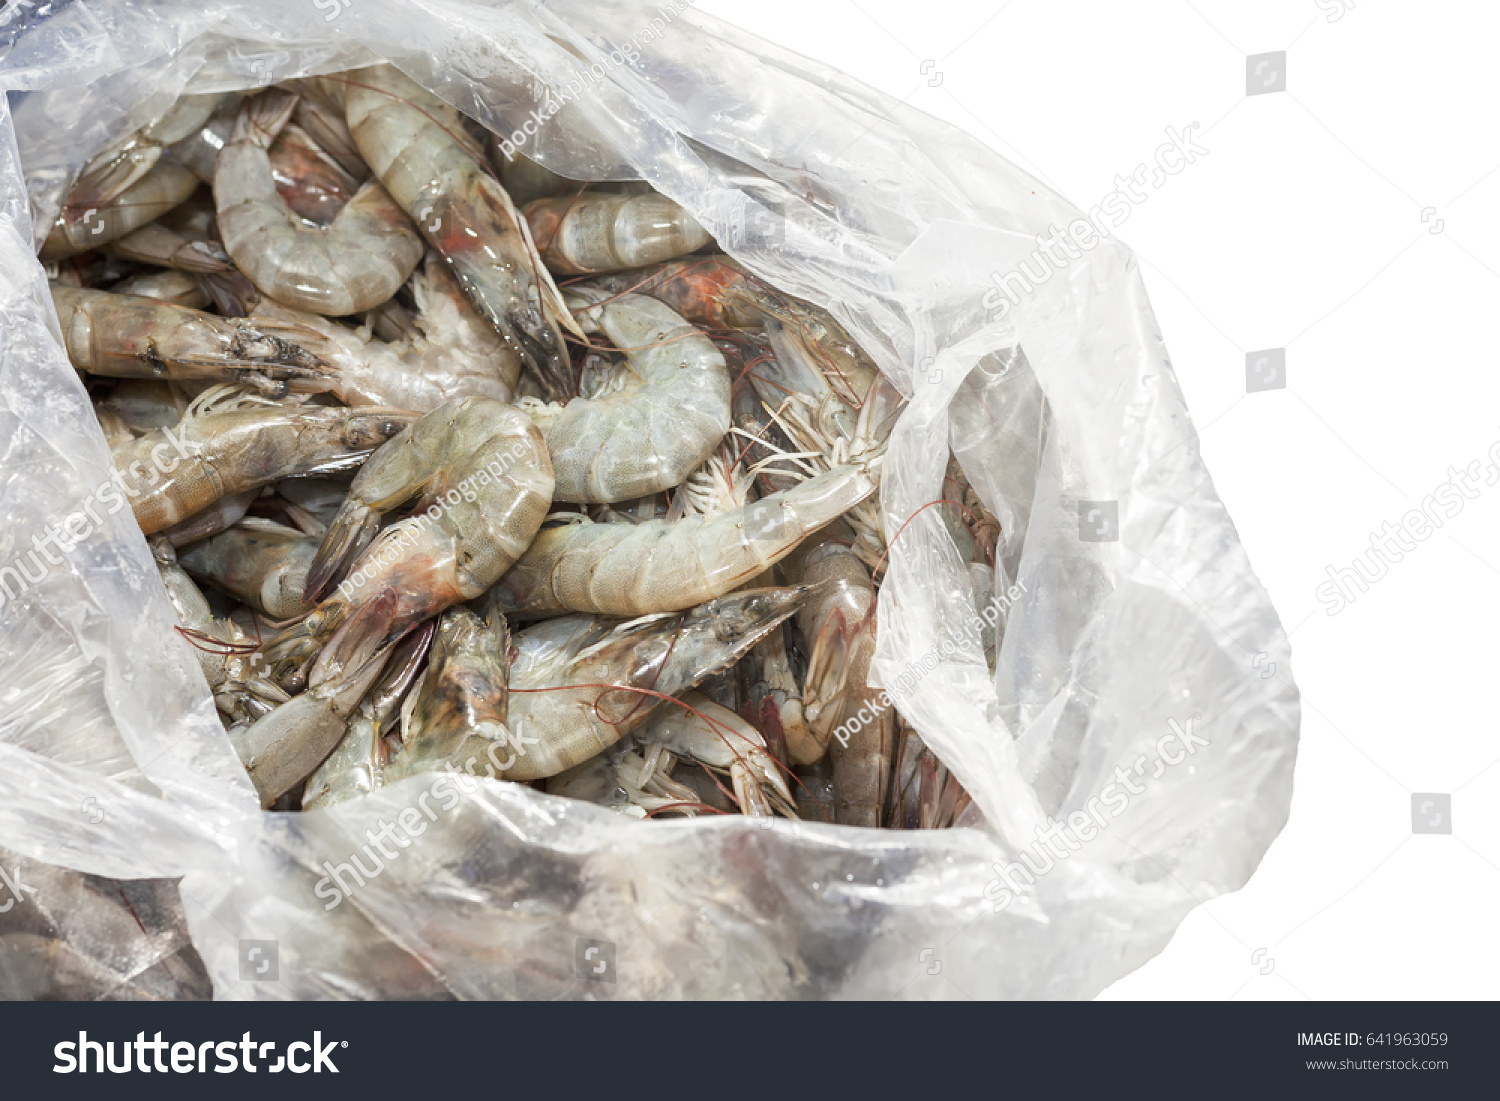 Download Fresh Raw Shrimp White Plastic Bag Food And Drink Stock Image 641963059 Yellowimages Mockups